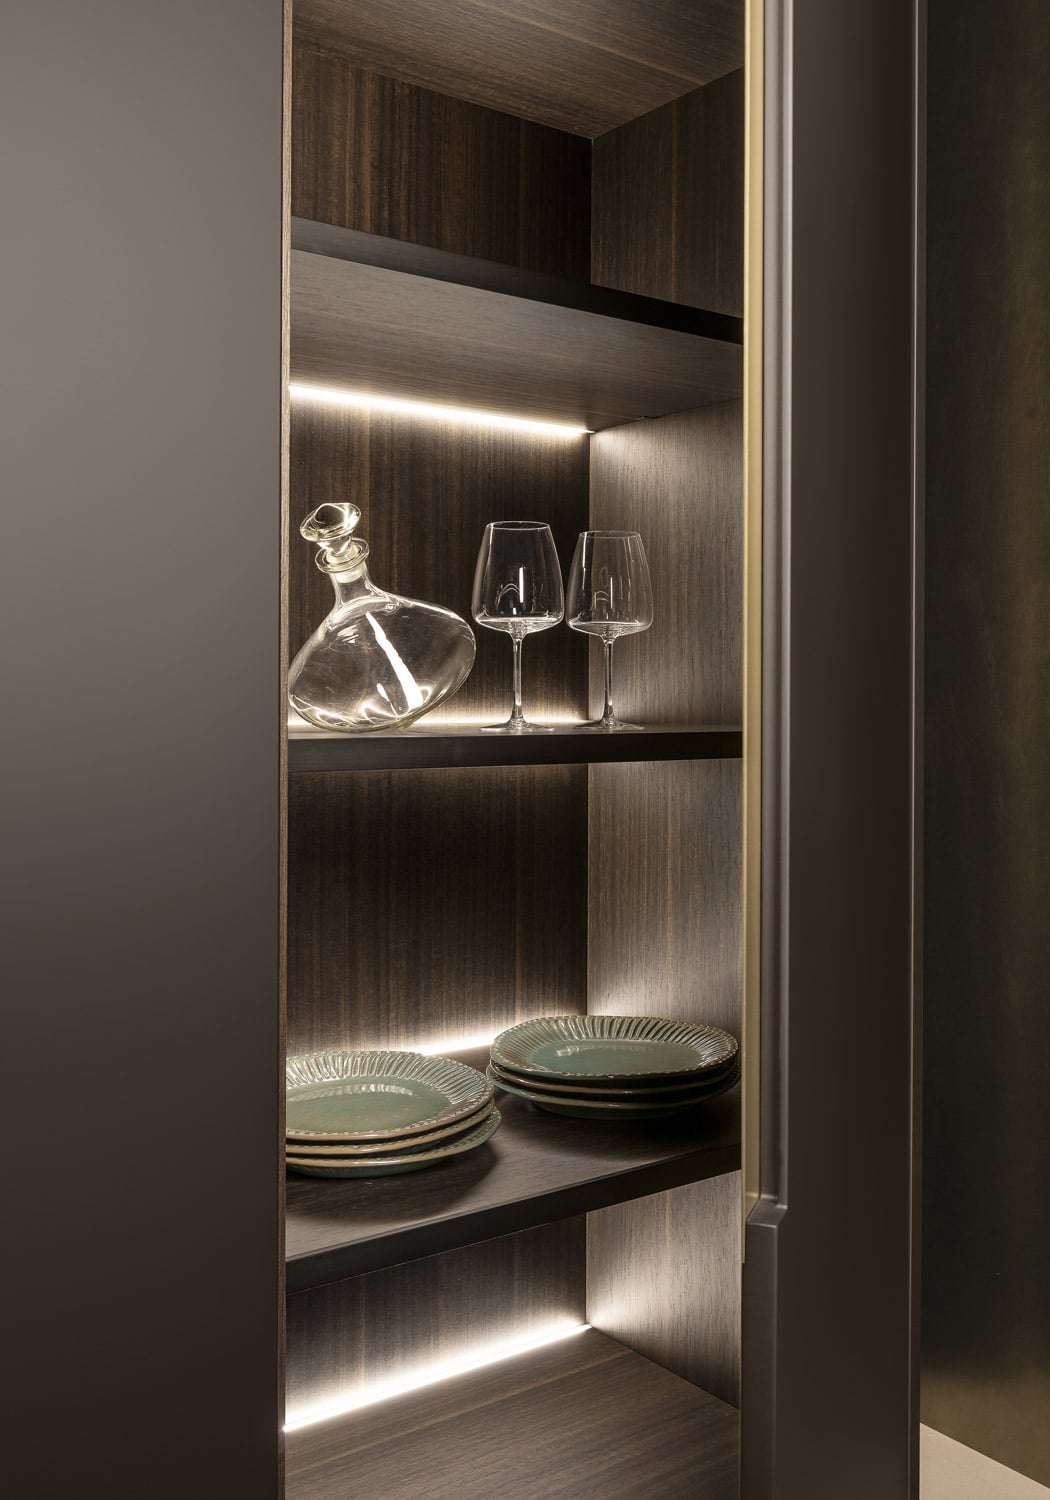 The pantry cabinets feature ad-hoc LED lighting that activates when the door opens.